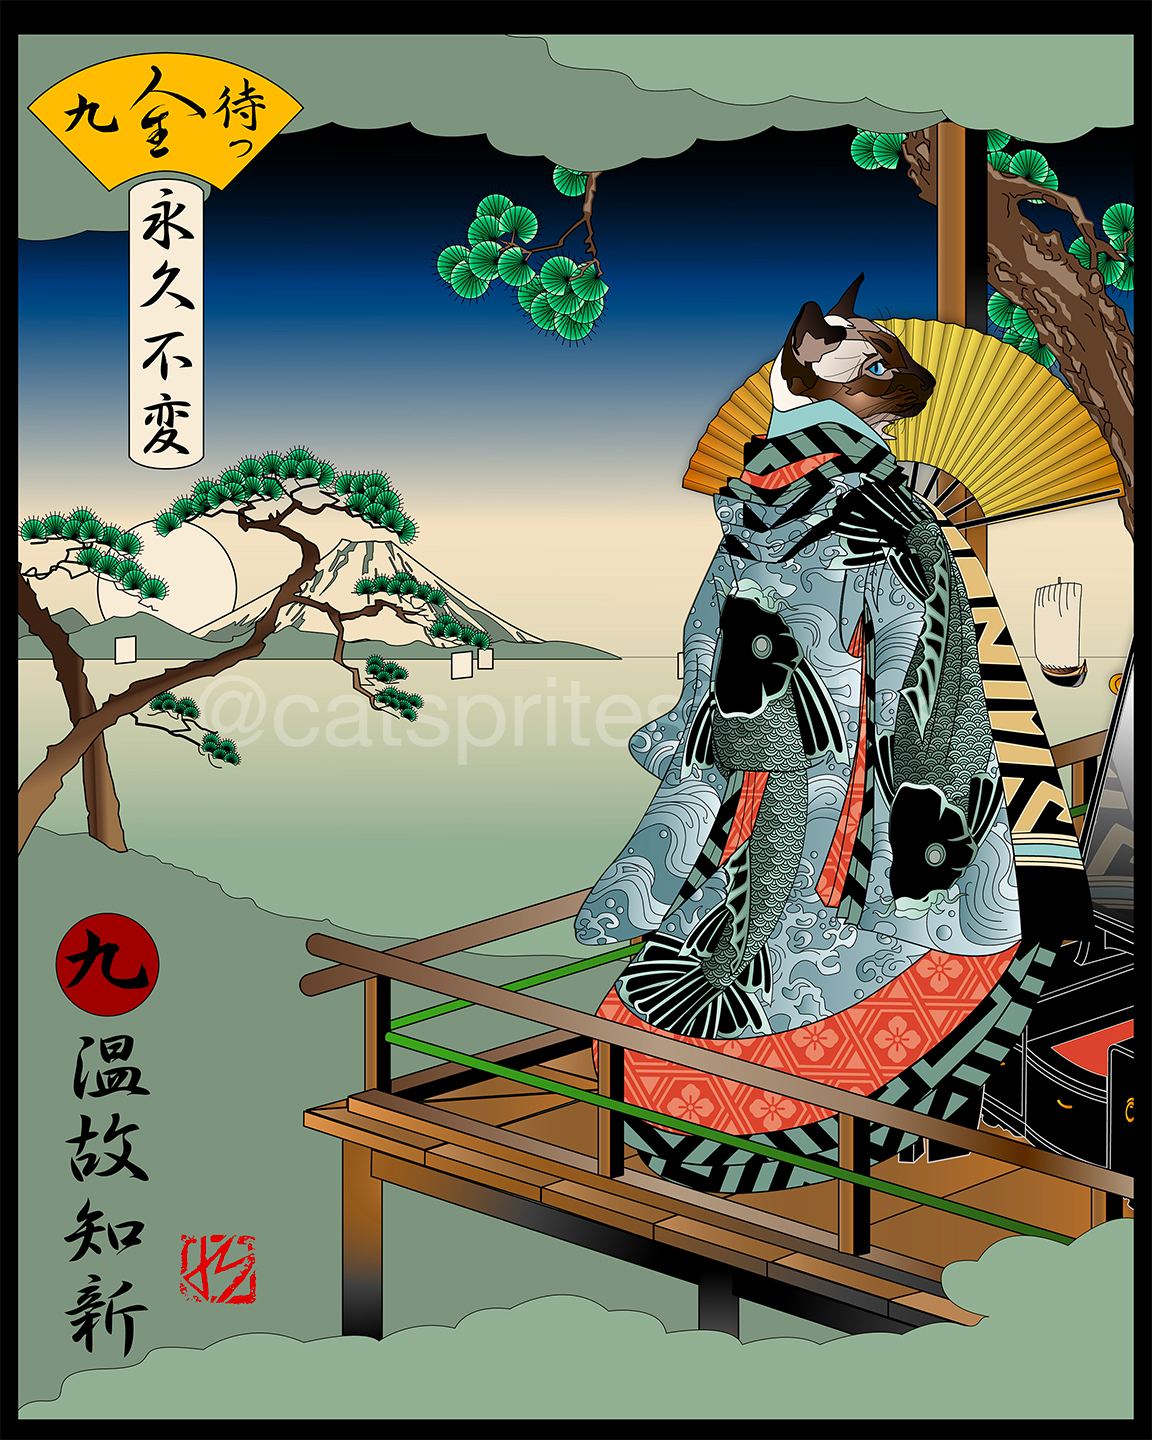 Based on the Japanese masters, 'Nine Lives ('If it takes forever I will wait for you')' is a sub-series of my Ukiyo-e Re